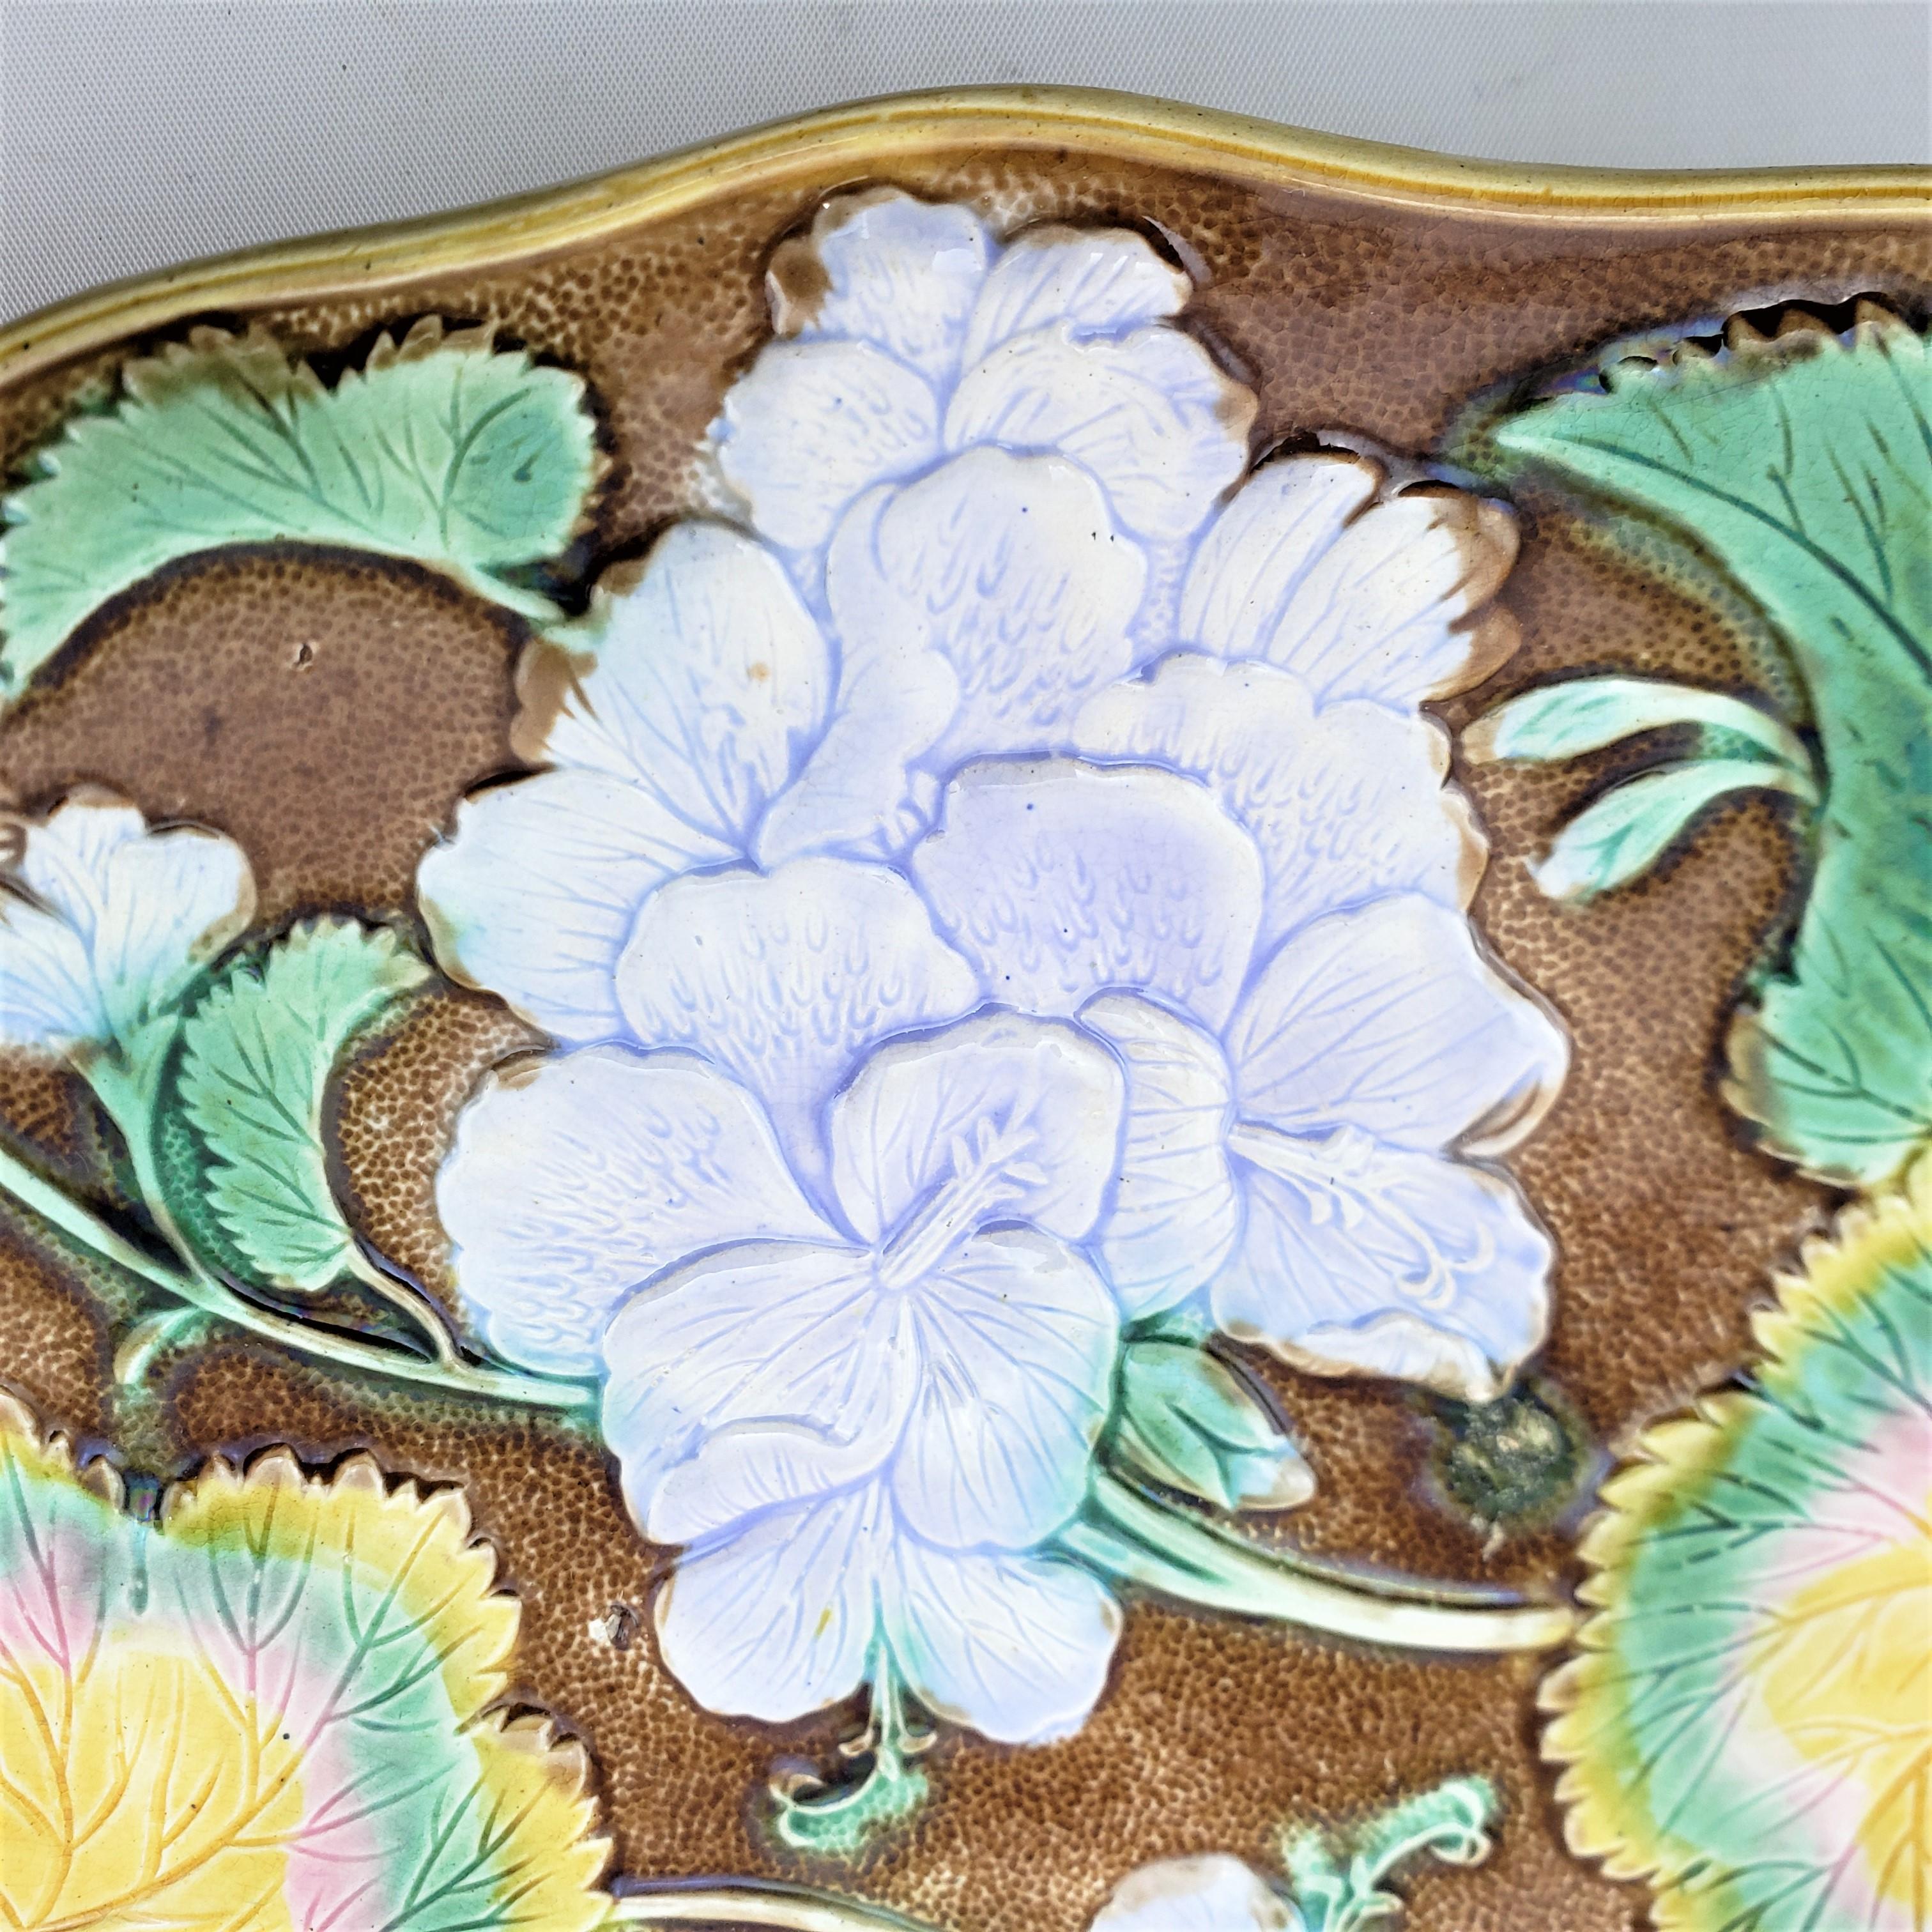 Small Antique Majolica Serving Dish or Platter with Leaf & Flower Decoration For Sale 4